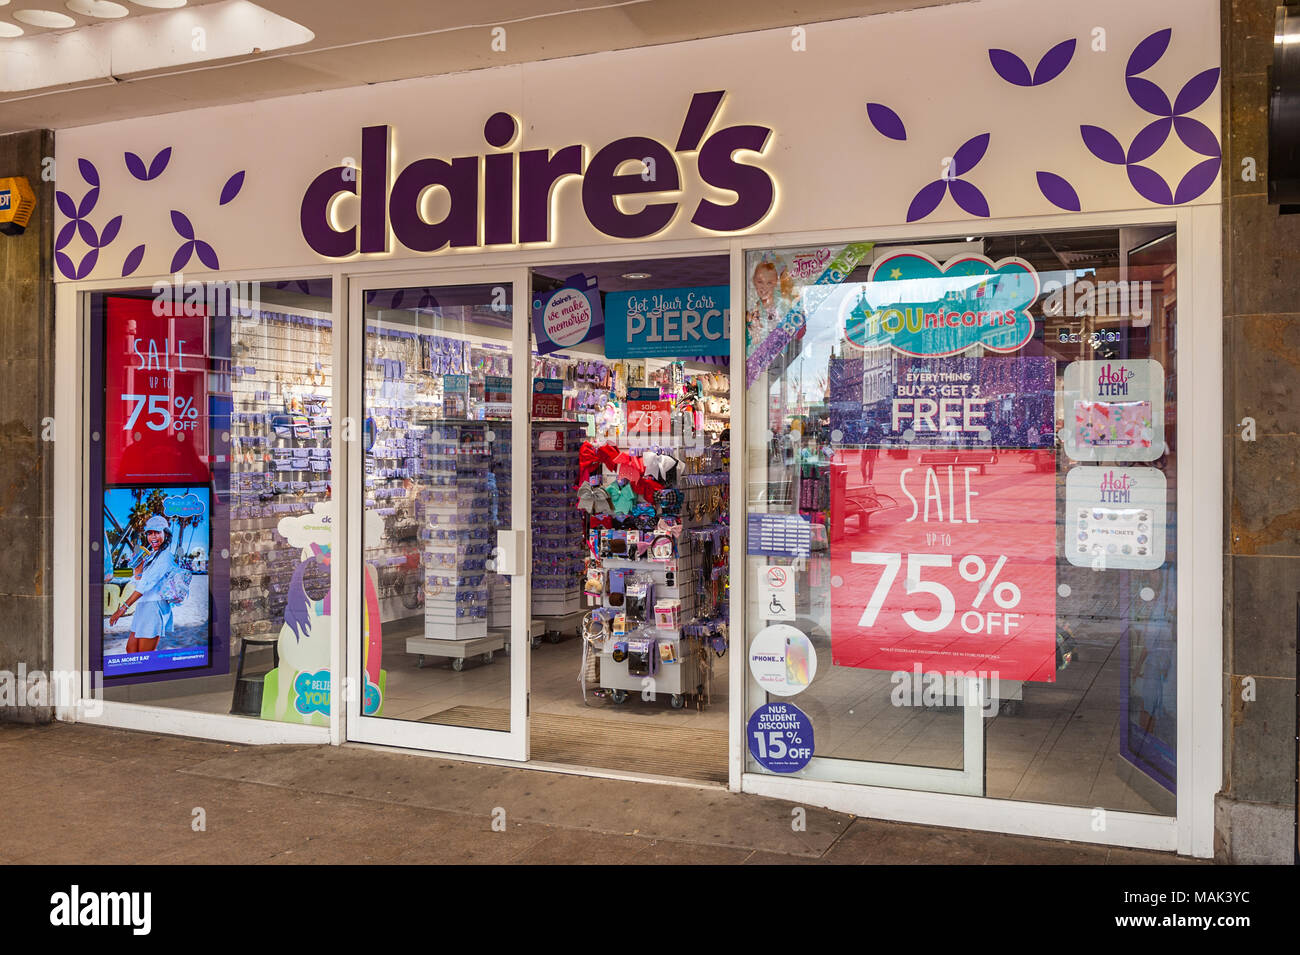 Claires Accessory Shop High Resolution Stock Photography and Images - Alamy